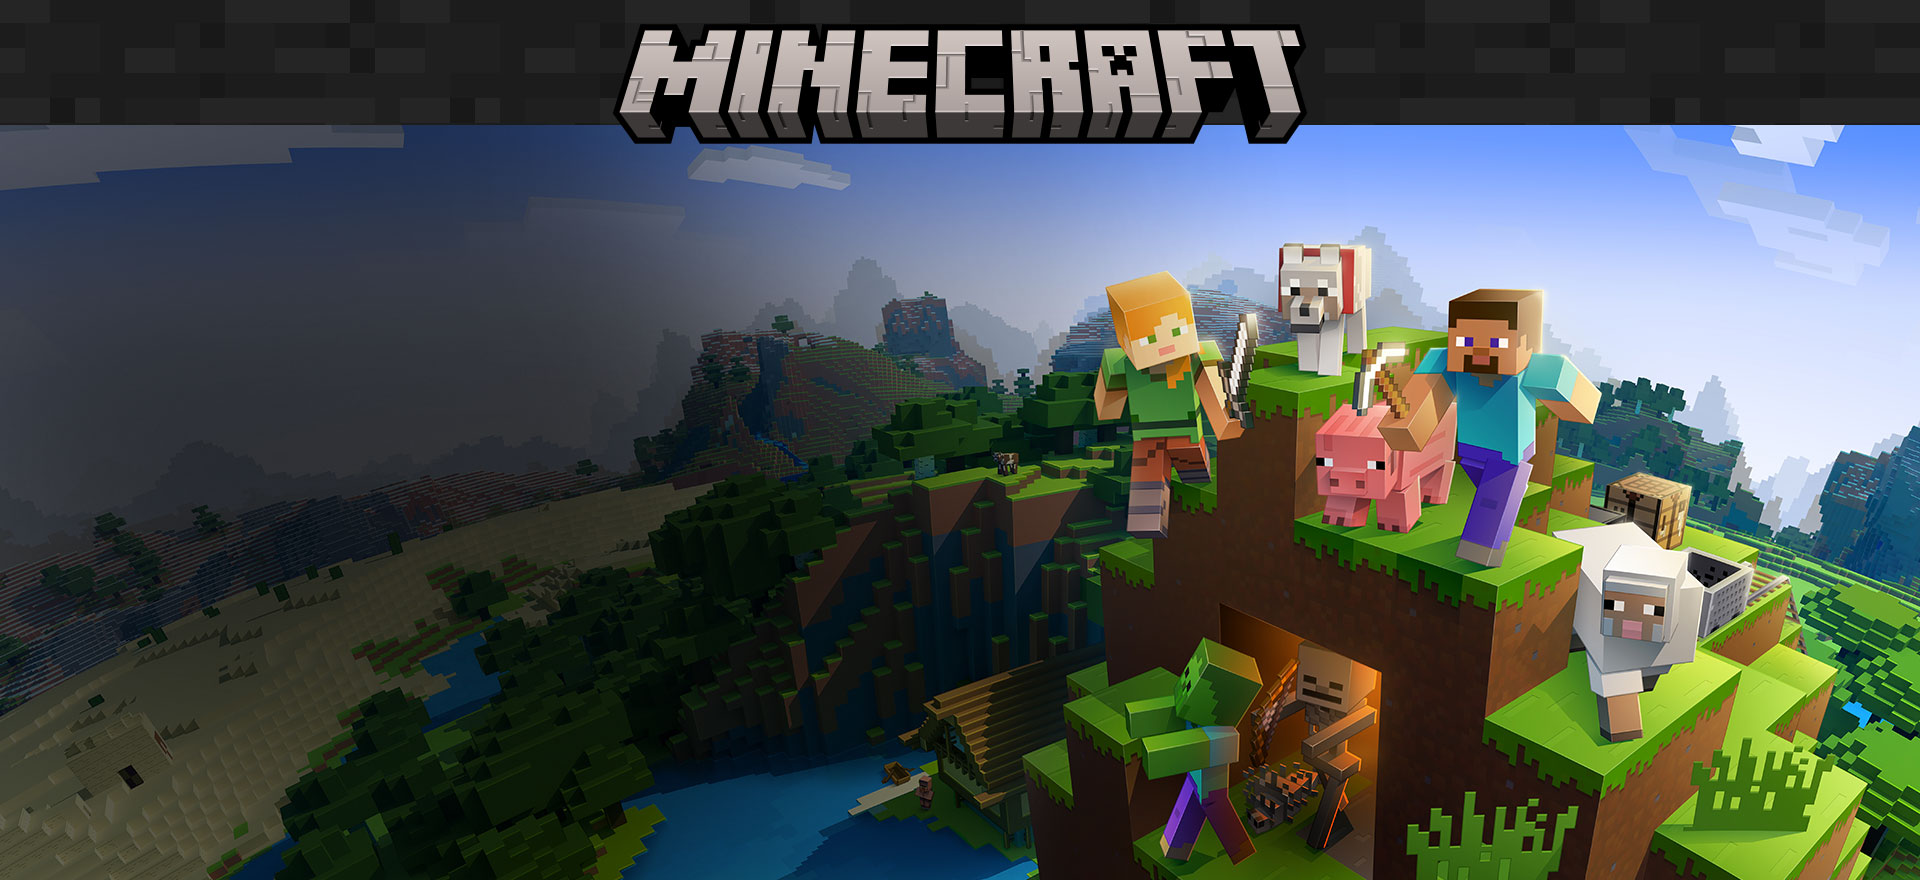 Peuter mengsel geloof Minecraft: Play with Game Pass | Xbox